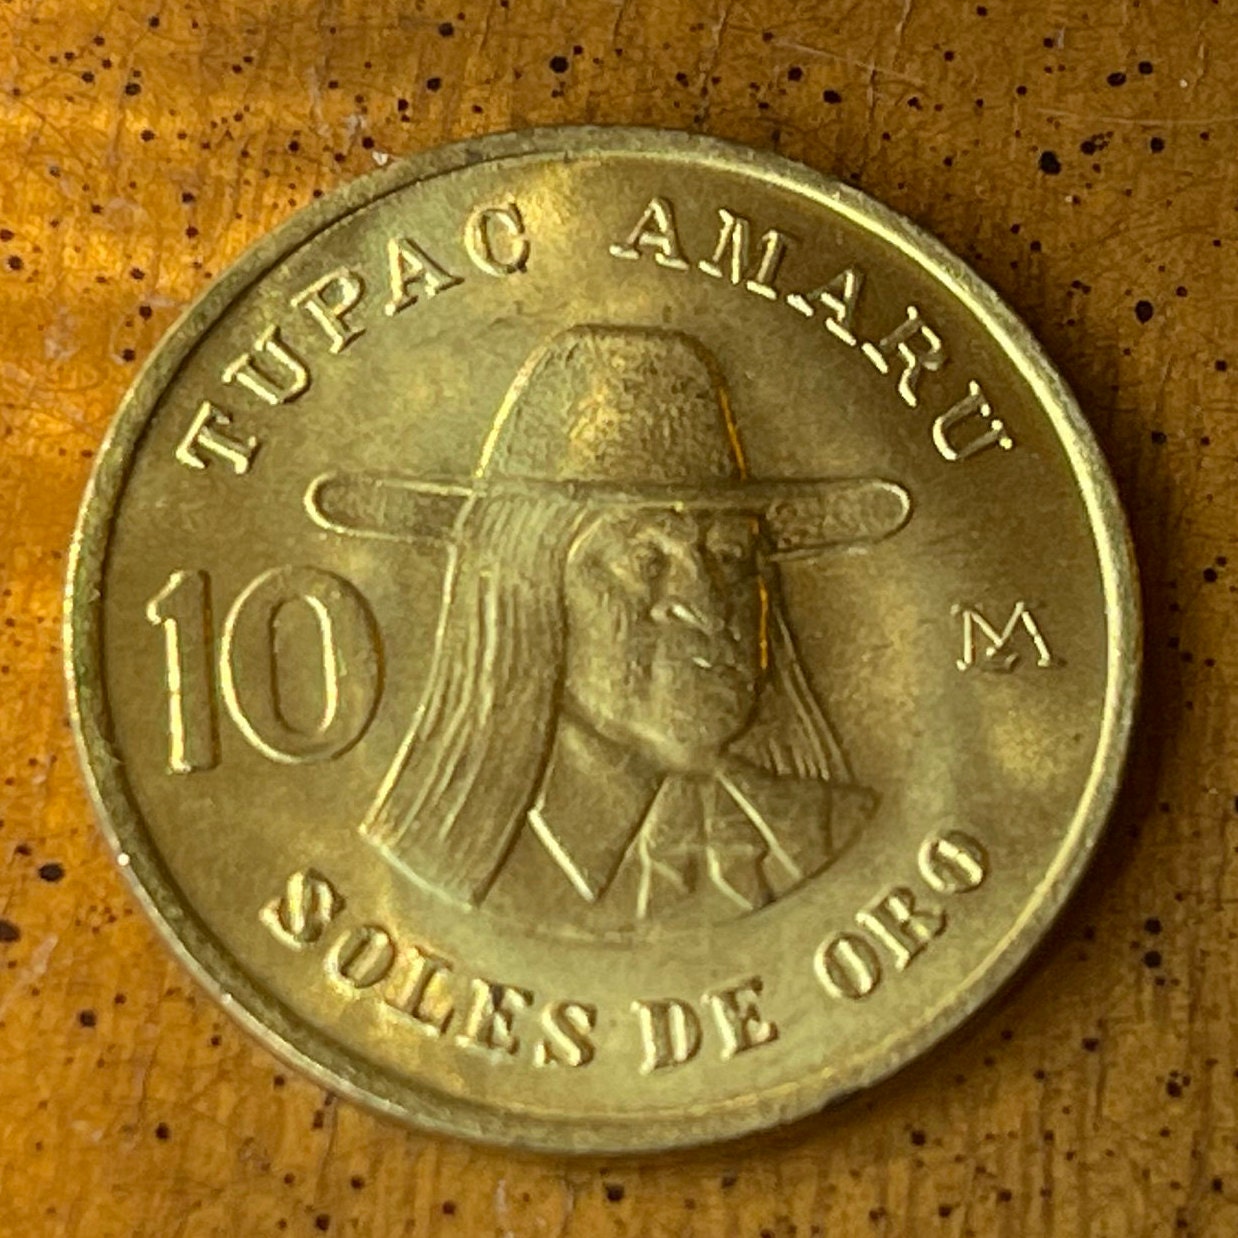 Revolutionary Tupac Amaru II 10 Soles Peru Authentic Coin Money for Jewelry and Craft Making (Indigenous Leader)